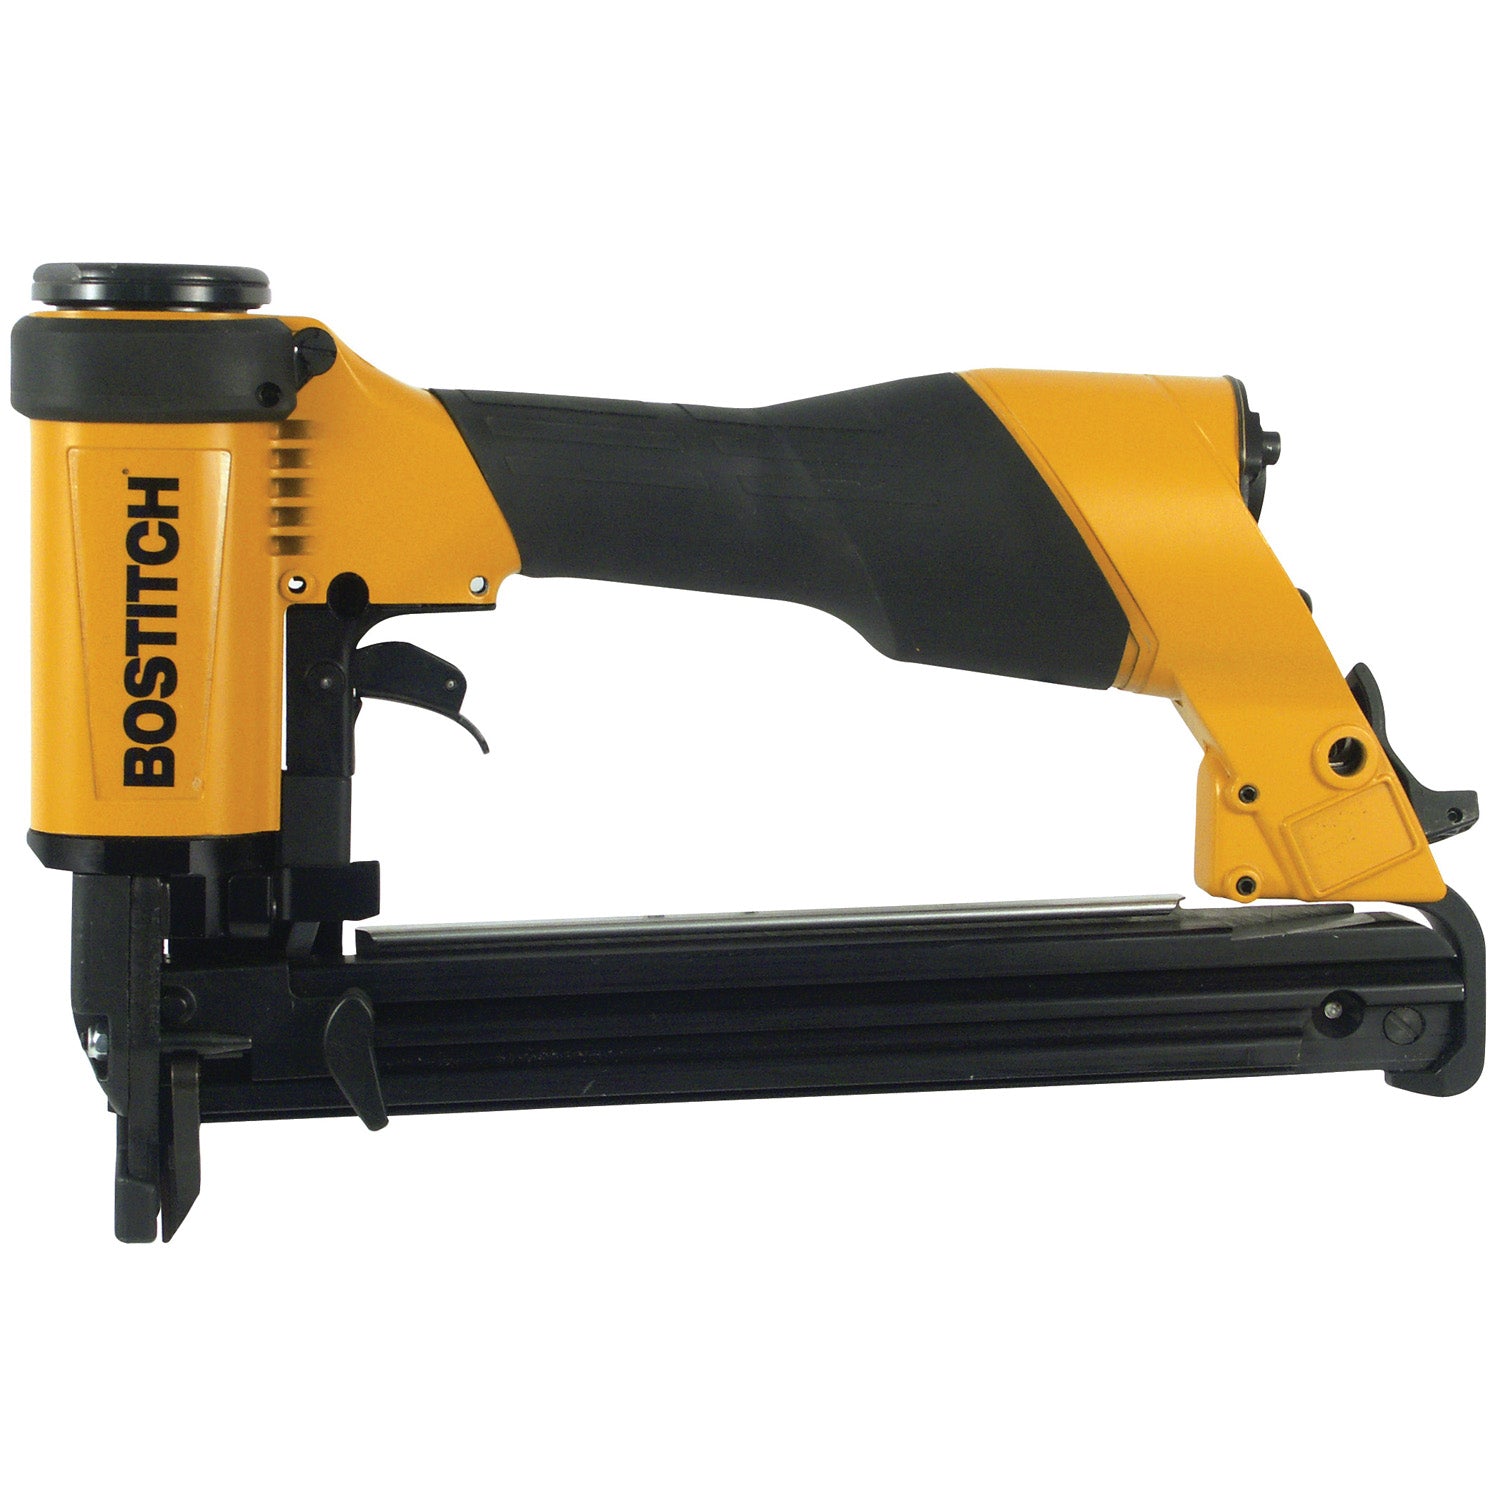 Bostitch N400C-1-E Industrial Coil Nailer-CT 100mm Max - First Fix Fasteners